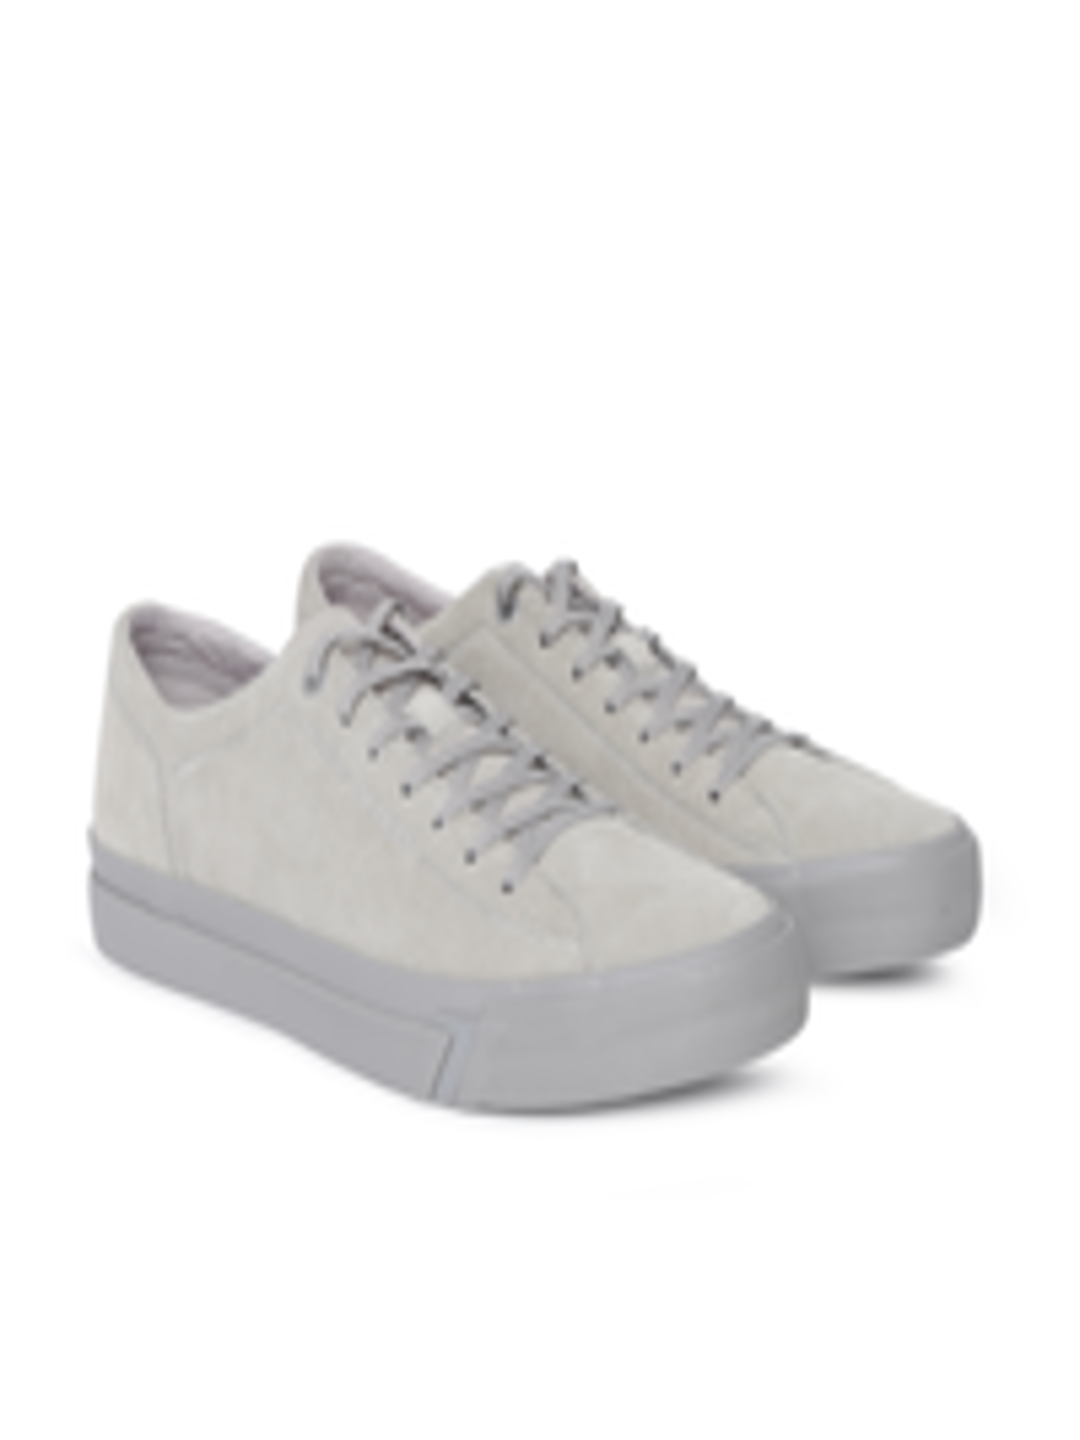 Buy Tommy Hilfiger Men Grey Suede Sneakers - Casual Shoes for Men ...